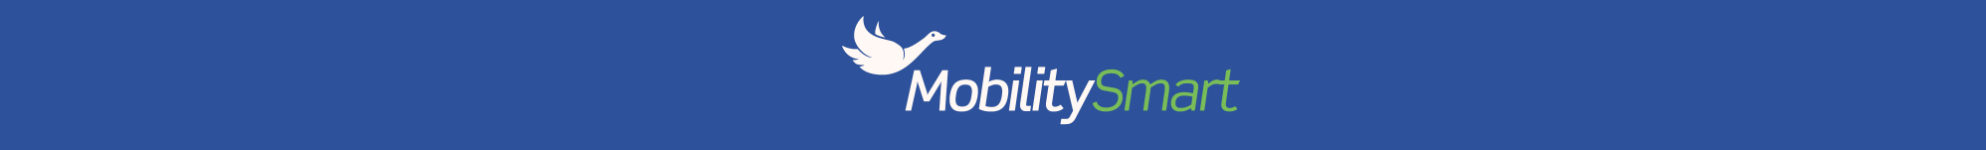 Mobility Smarts background